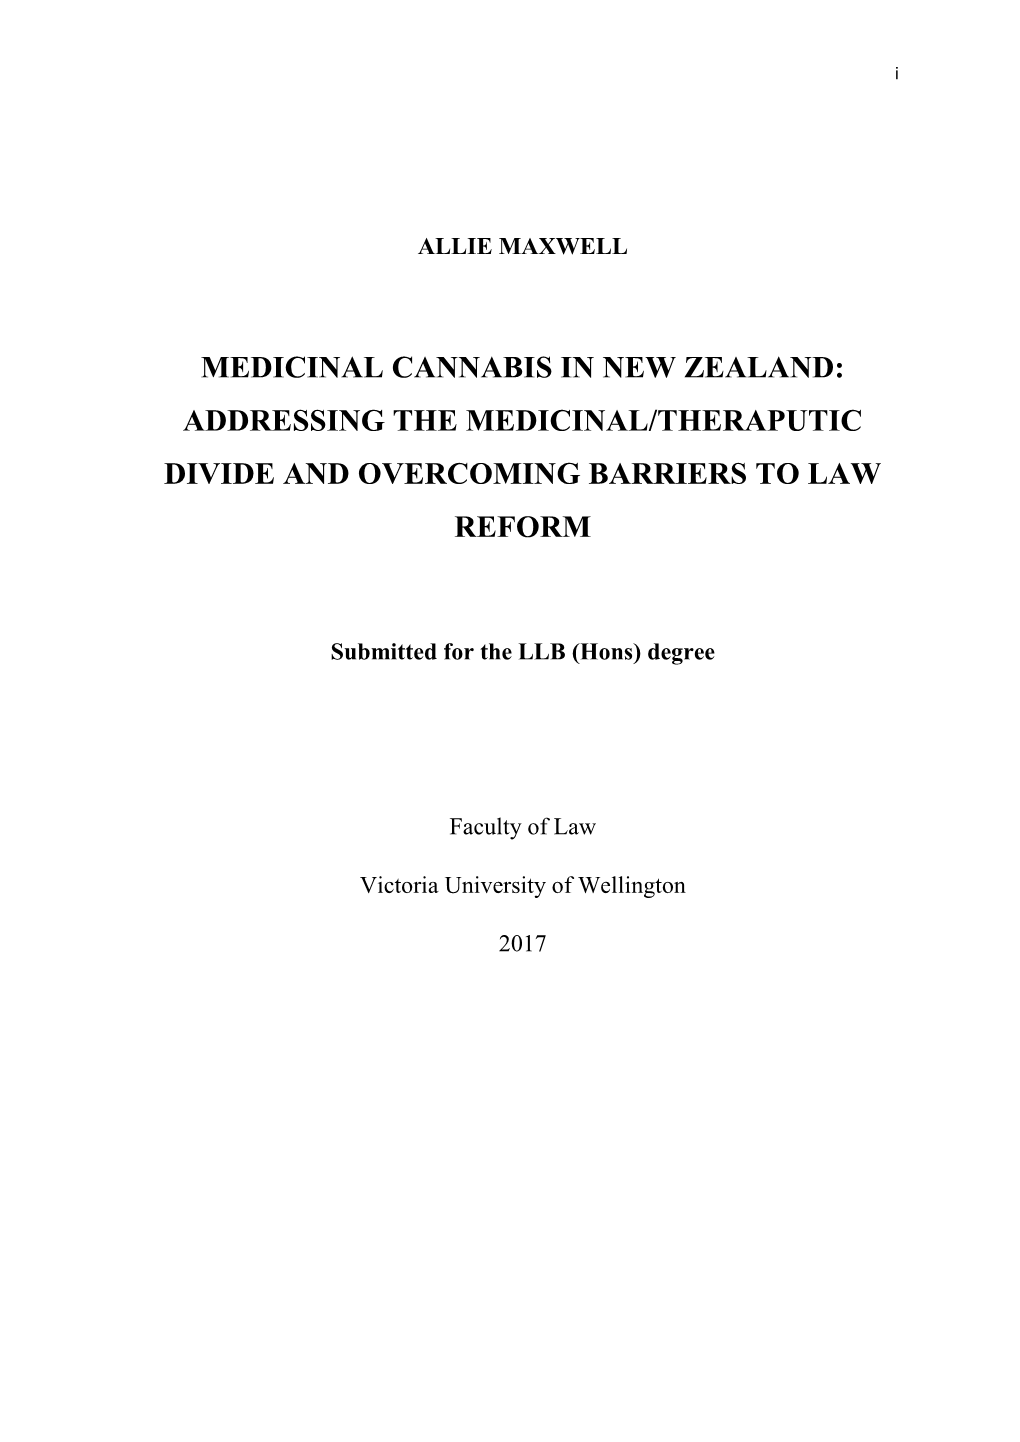 Medicinal Cannabis in New Zealand: Addressing the Medicinal/Theraputic Divide and Overcoming Barriers to Law Reform